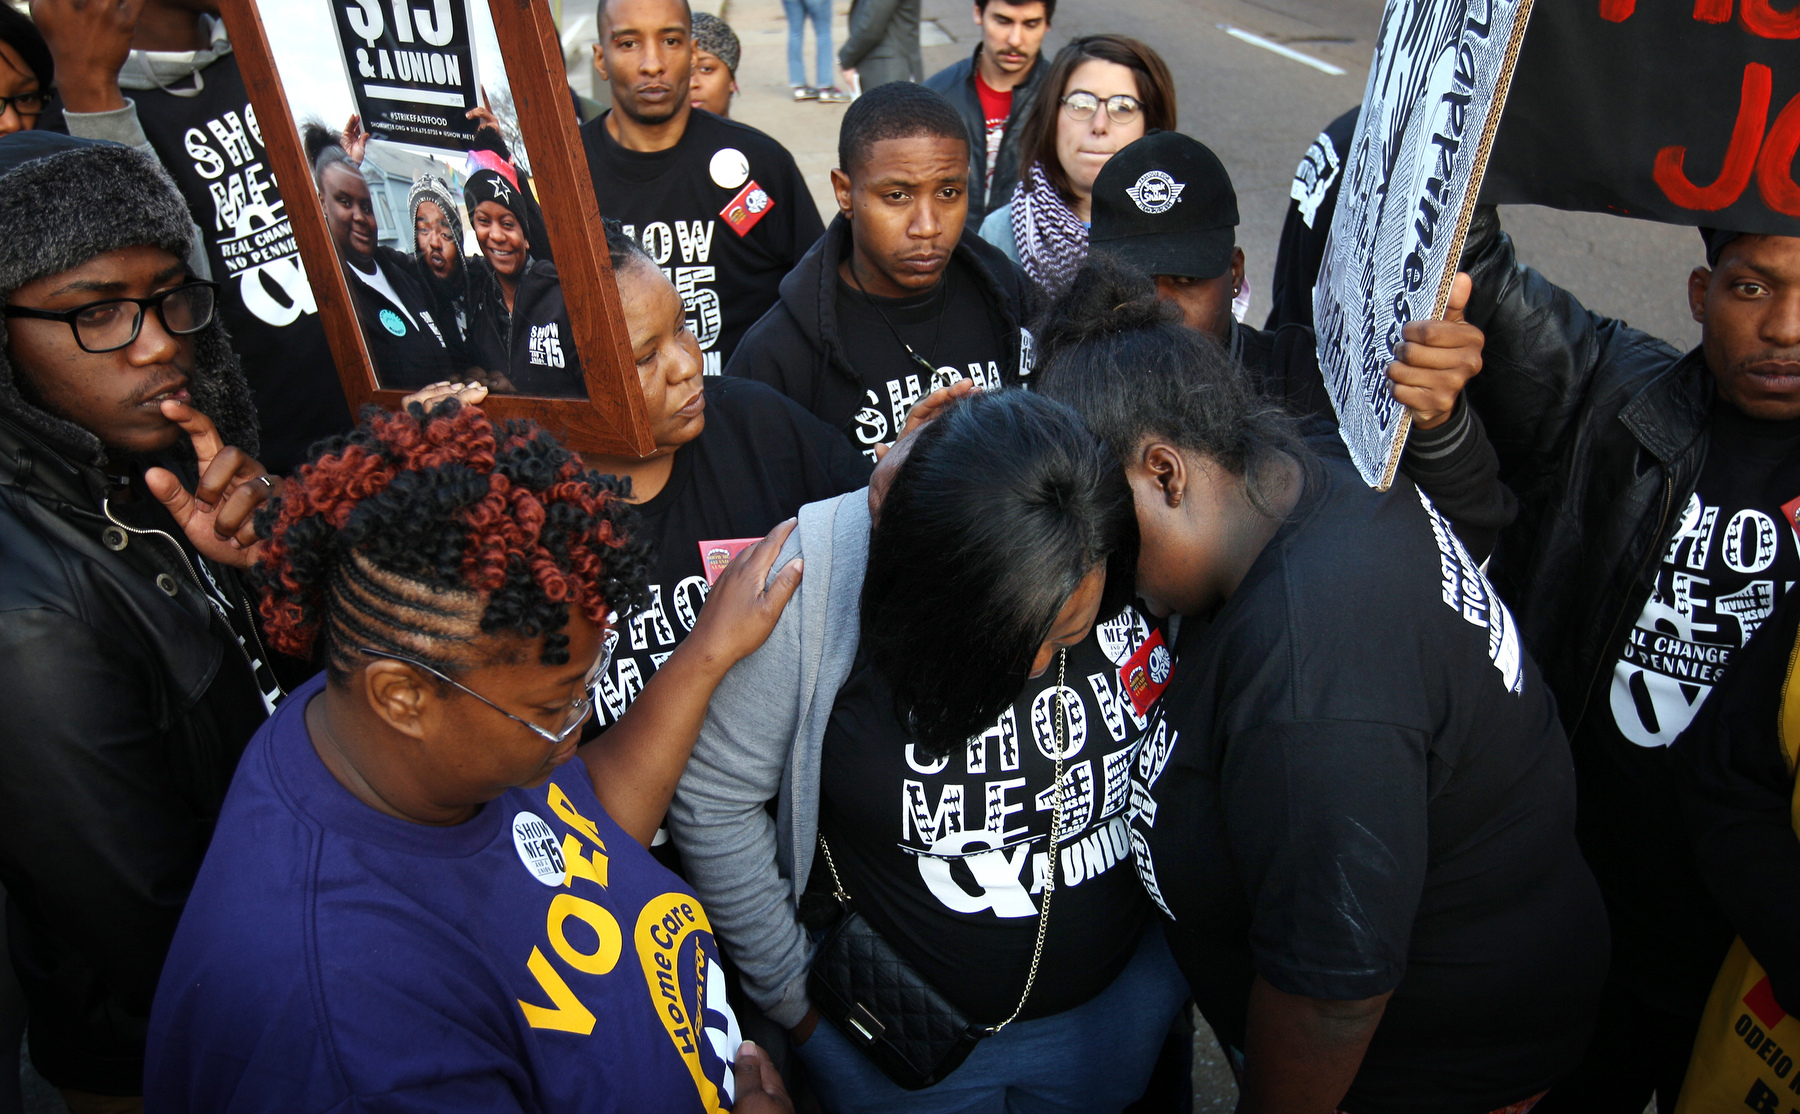 April 14, 2016 - Protesters comfort Diaeatha Cathey (center) as they have a moment of silence and prayer for a fellow protester named Gerial Jeans who was found shot to death in an SUV on April 10. The protesters were gathered with the {quote}Fight for 15{quote} movement seeking higher wages for fast food workers. Jeans participated in past protests. (Mike Brown/The Commercial Appeal)